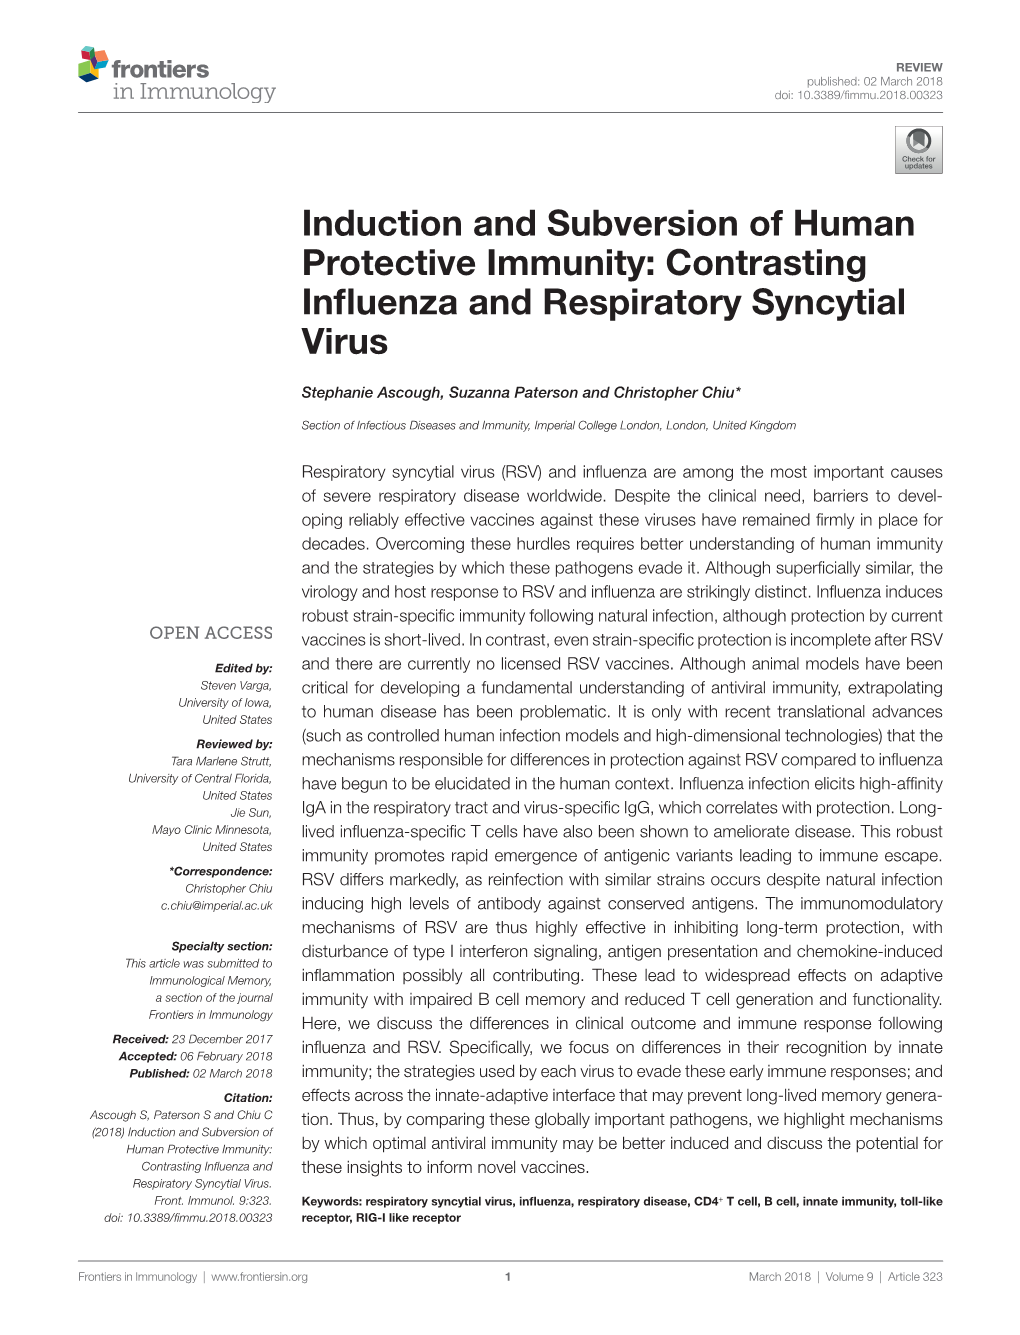 Contrasting Influenza and Respiratory Syncytial Virus